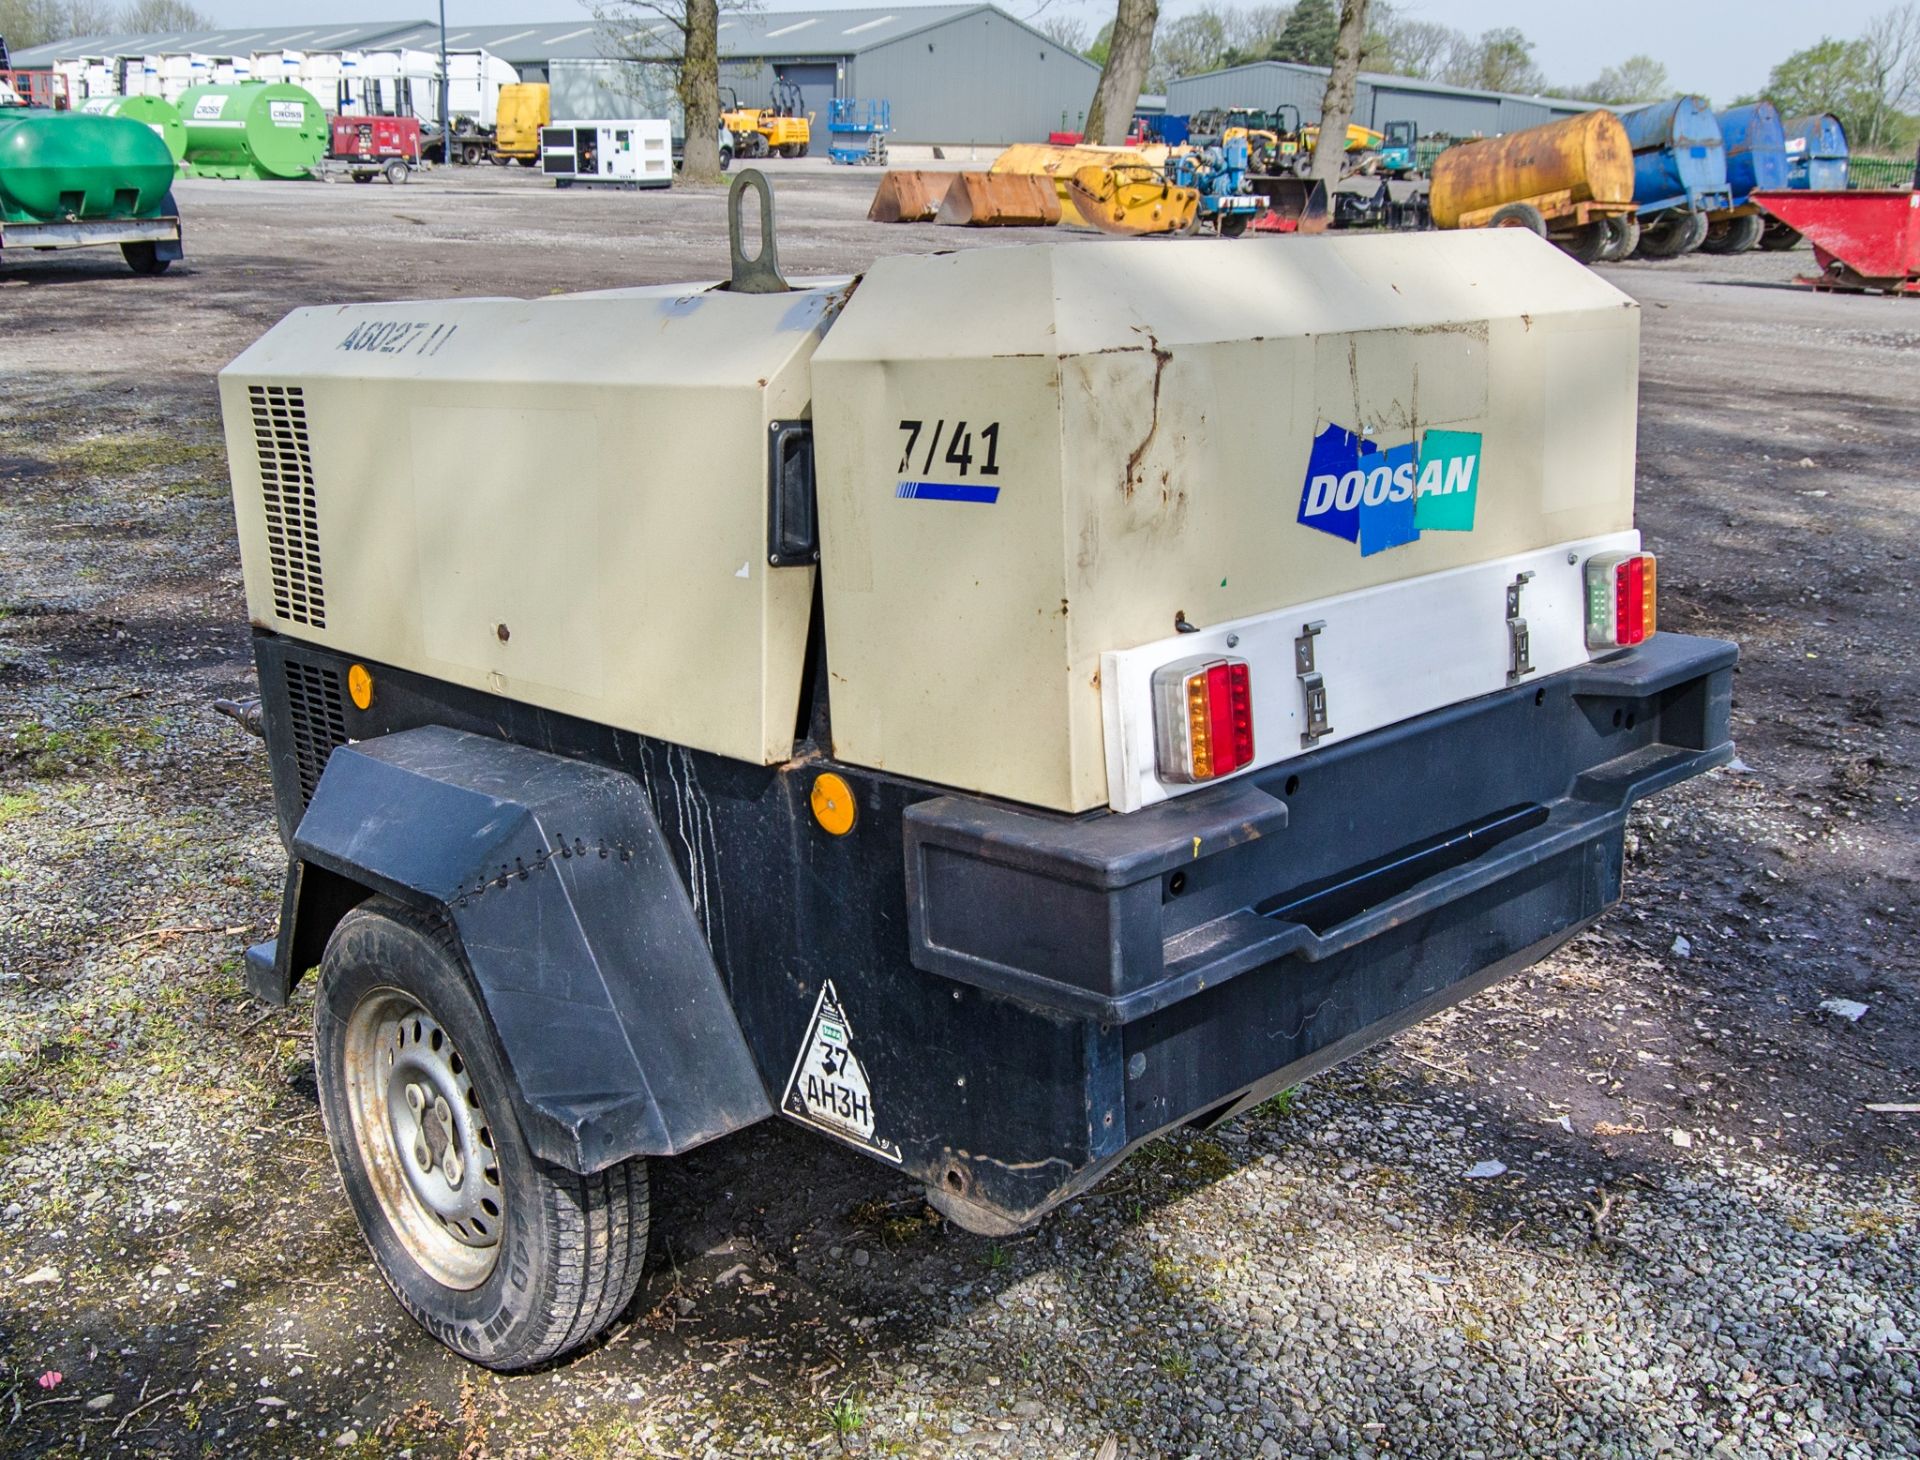 Doosan 741 diesel driven fast tow mobile air compressor Year: 2013 S/N: 432032 Recorded Hours: - Image 4 of 11